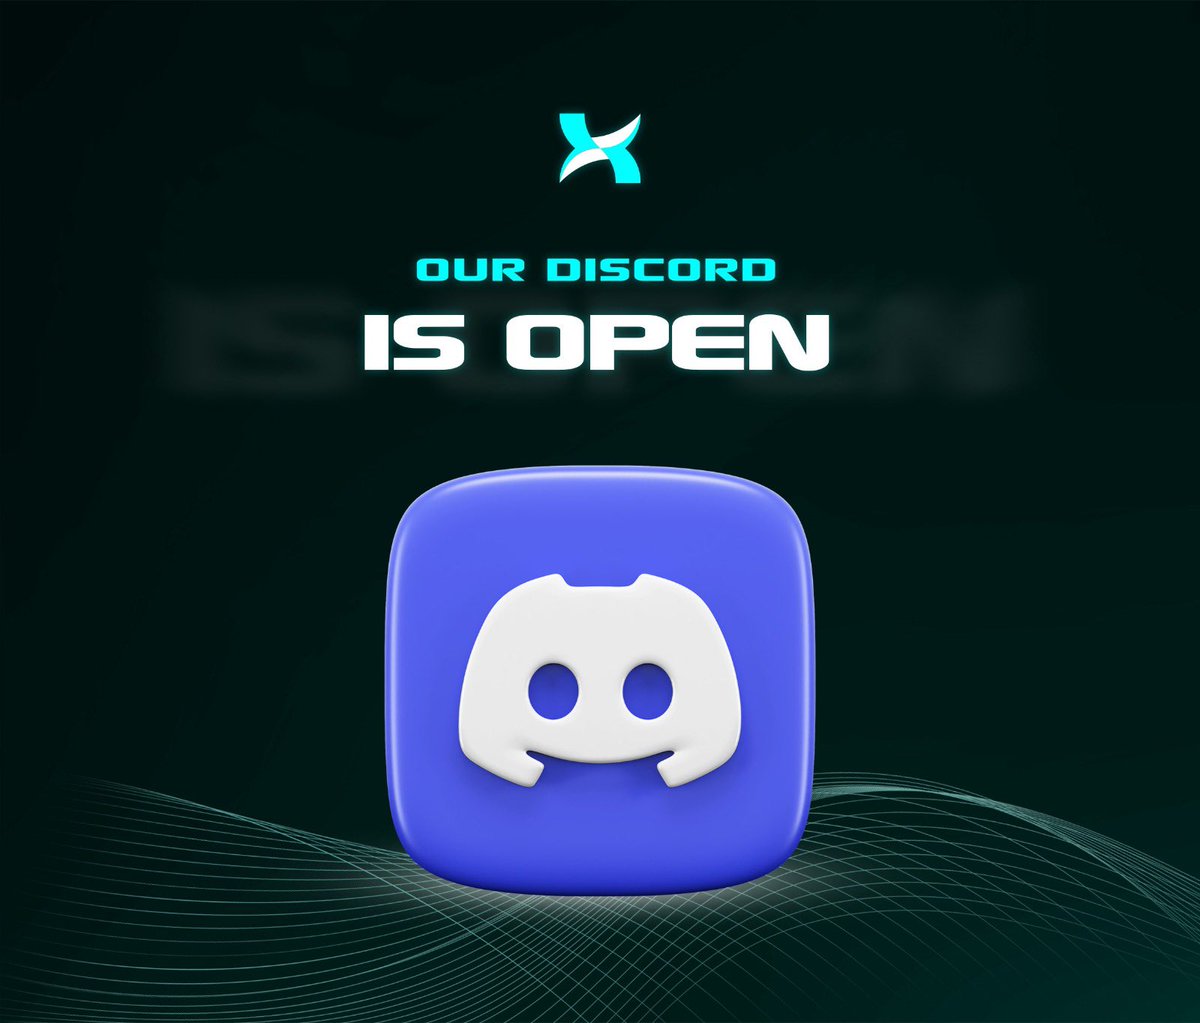 Big week coming for IBX 👀 Finally our Discord is now open discord.gg/ibxtrade Ready to Trade with the lowest fees on @OrderlyNetwork 😎🤝🪂